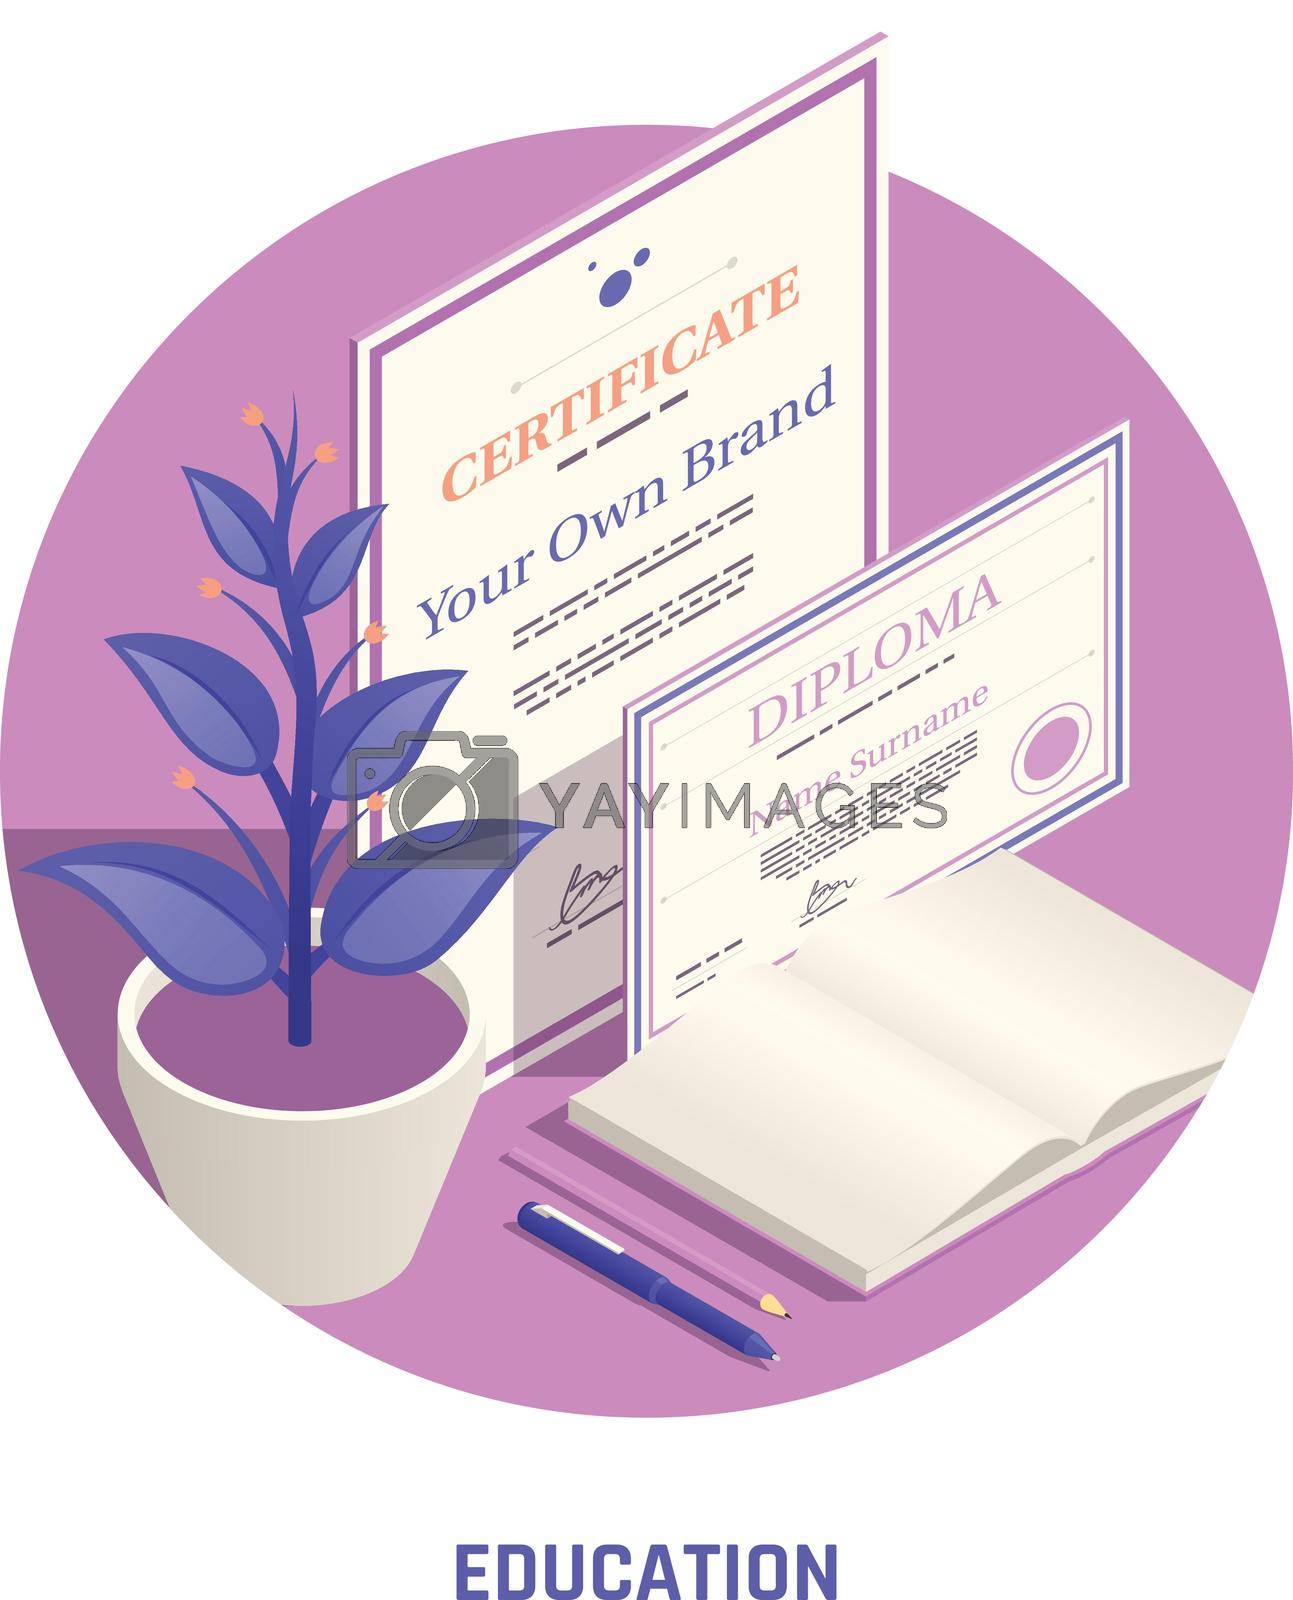 Self promotion personal branding strategies education circular isometric composition with marketing degree official certificate diploma vector illustration